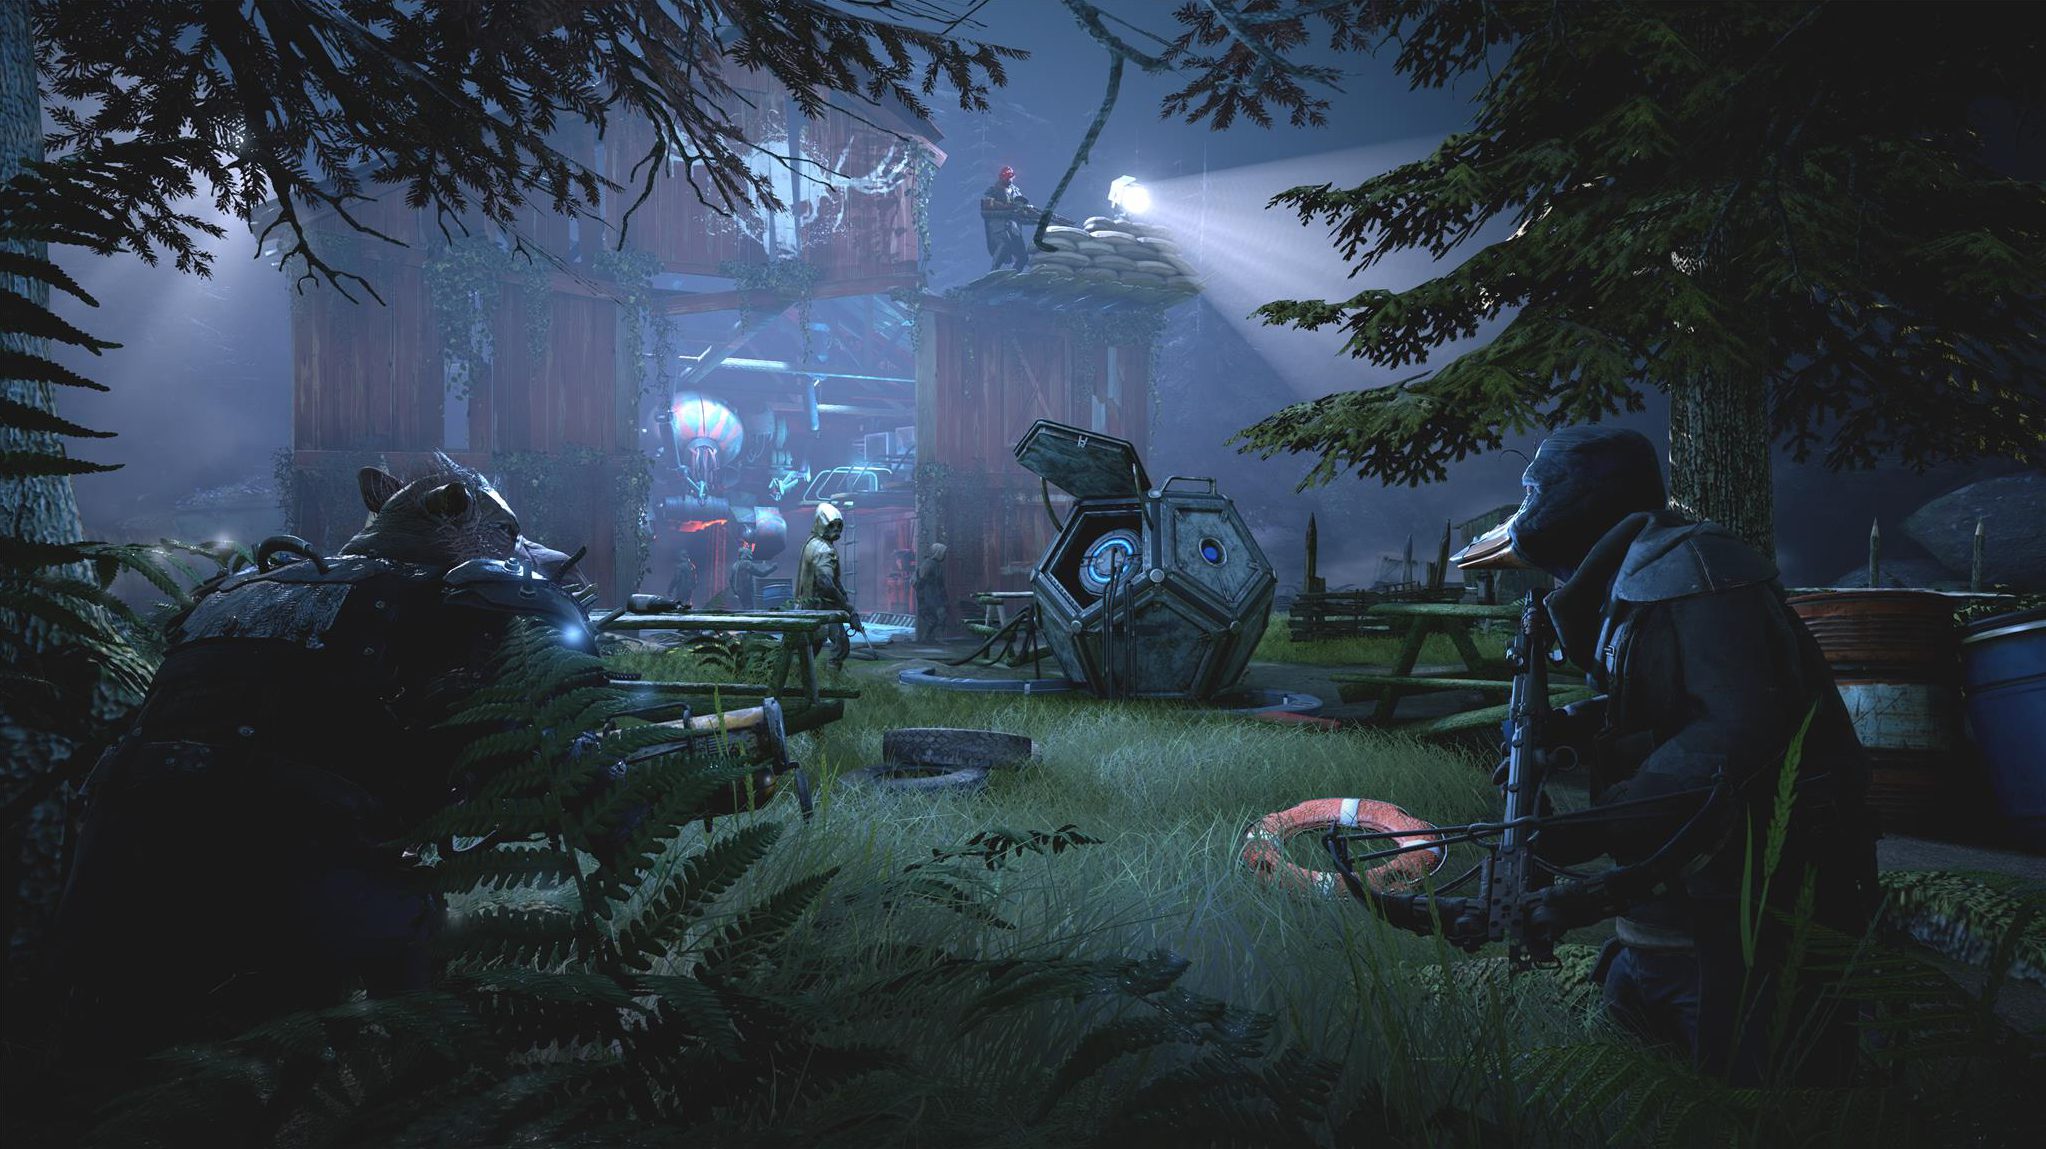 Mutant Year Zero is out today to fill you tactical turn-based needs